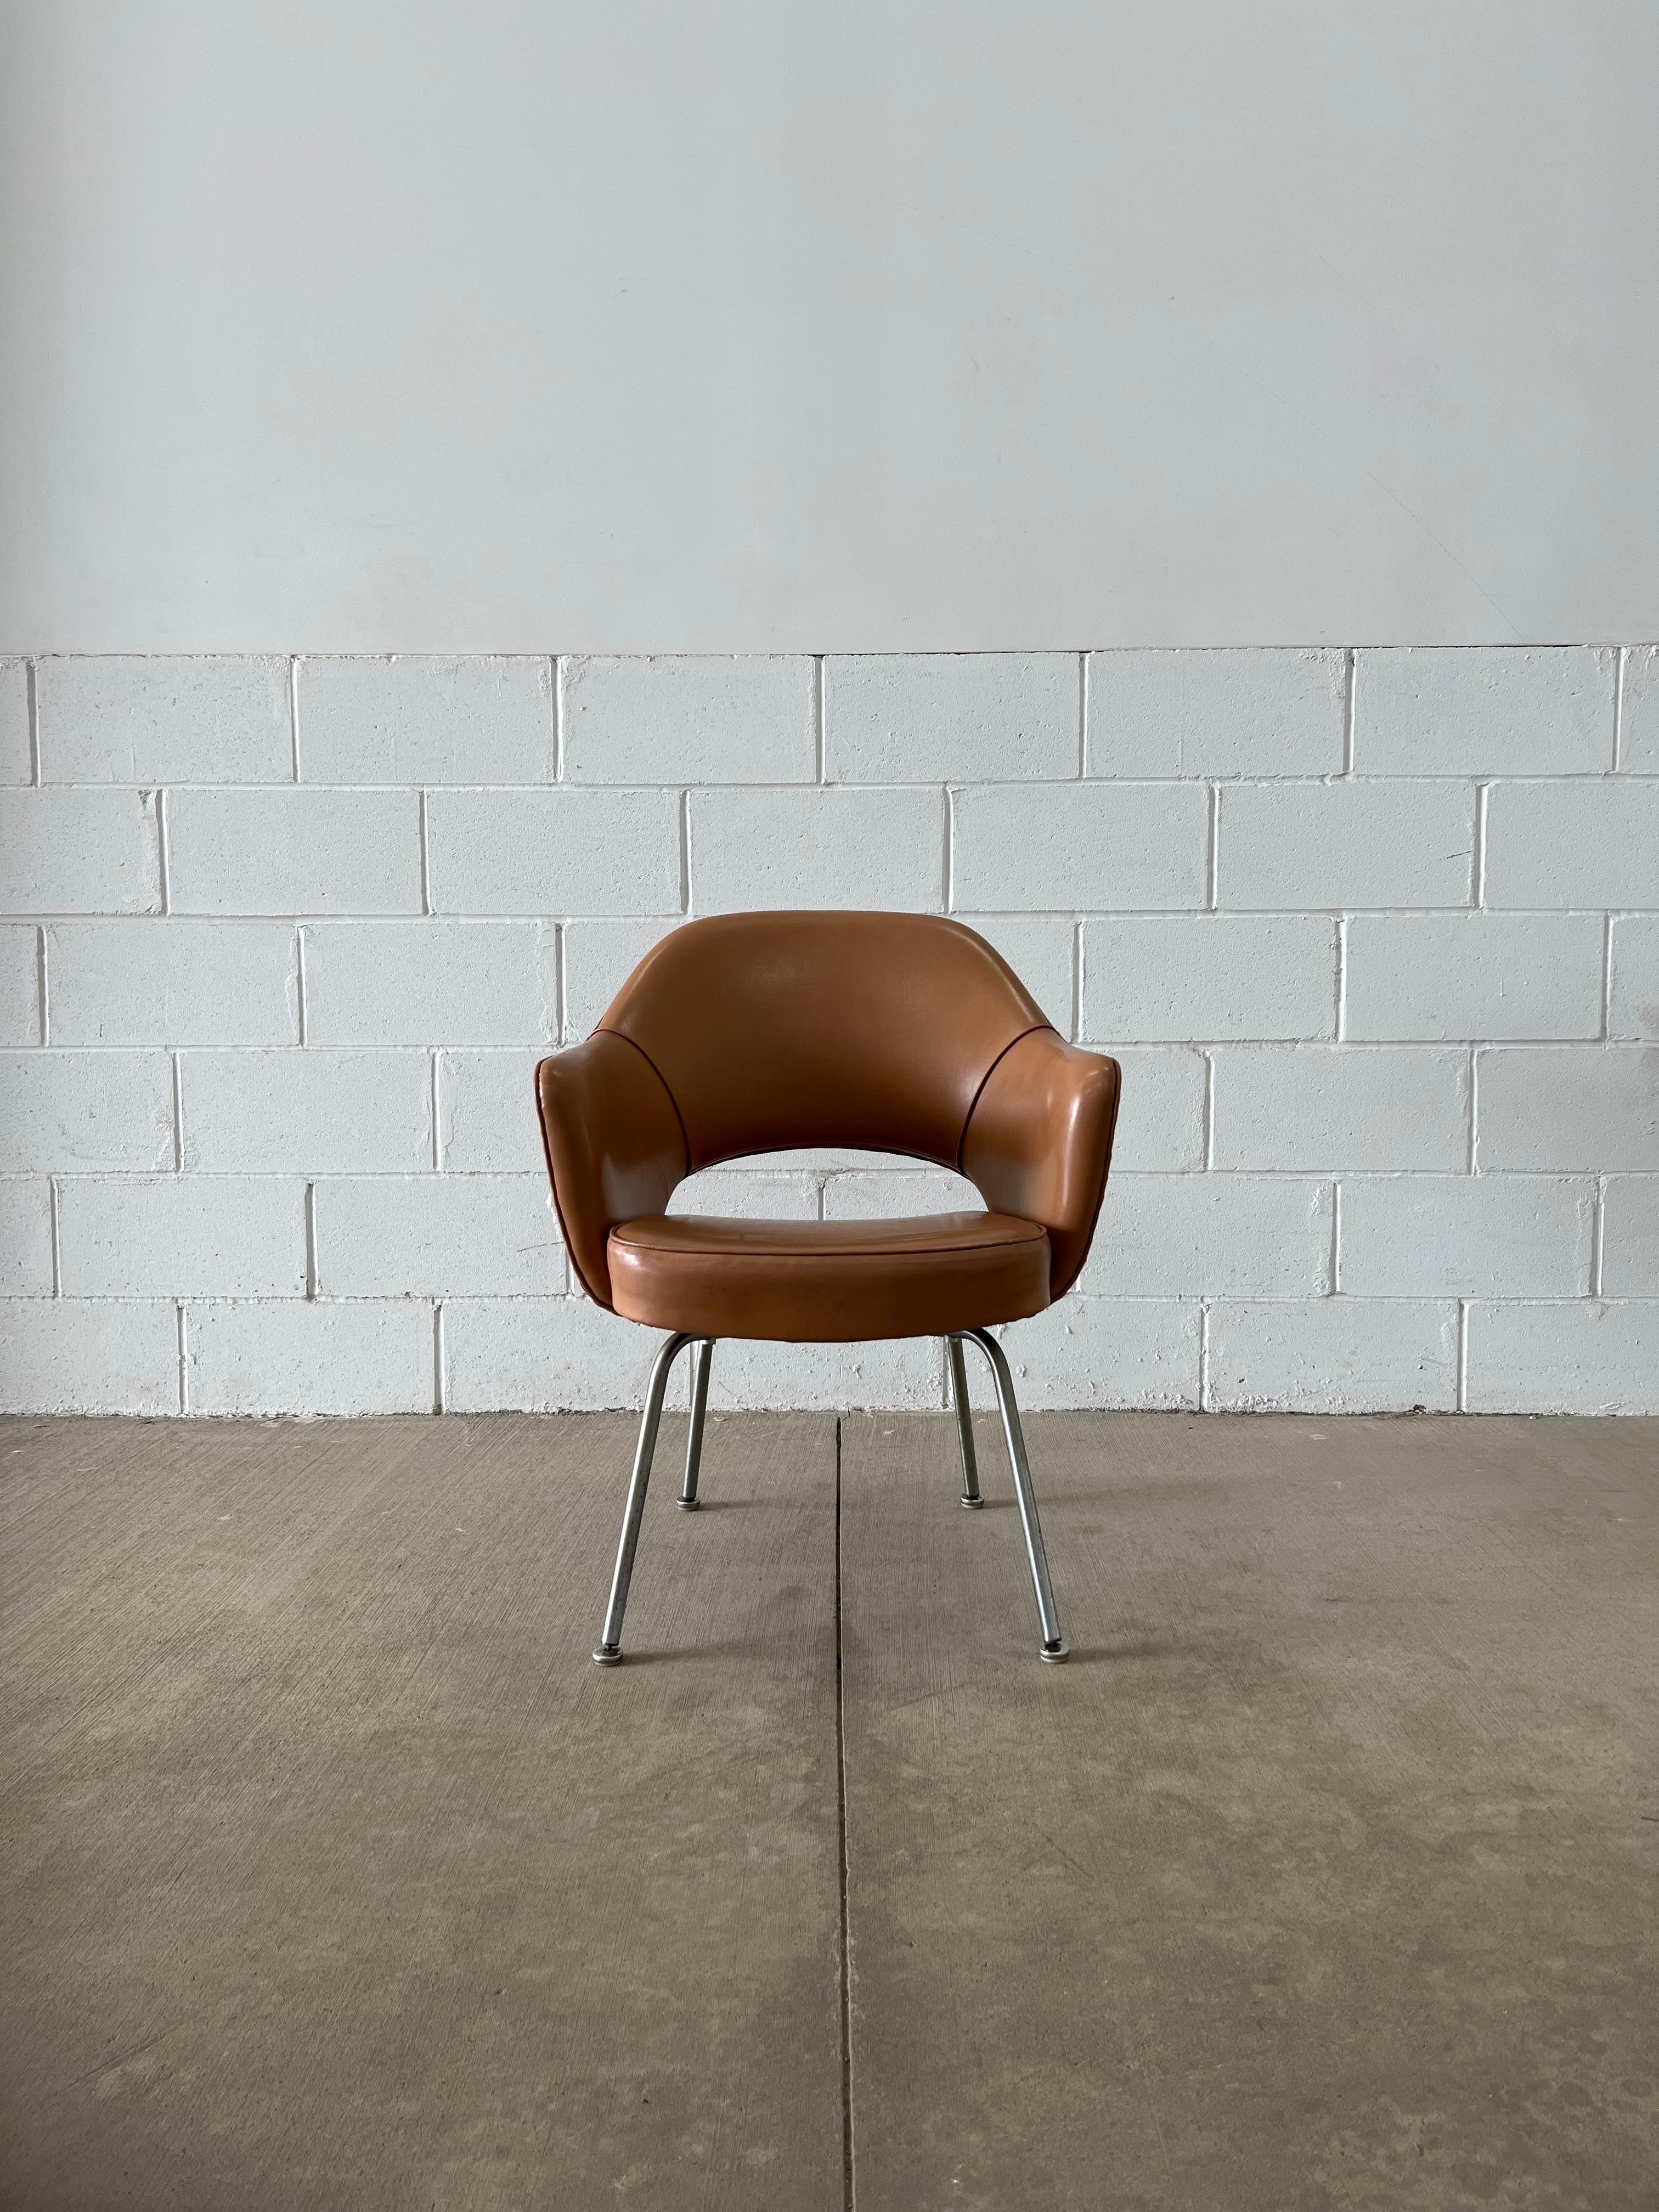 An armed version of the Model 70 armless chair was introduced in 1950 and dubbed the Model 71. In 1951, Knoll Associates moved to 575 Madison Ave and changed to Knoll International. This chair is nestled right between those two milestones and thus